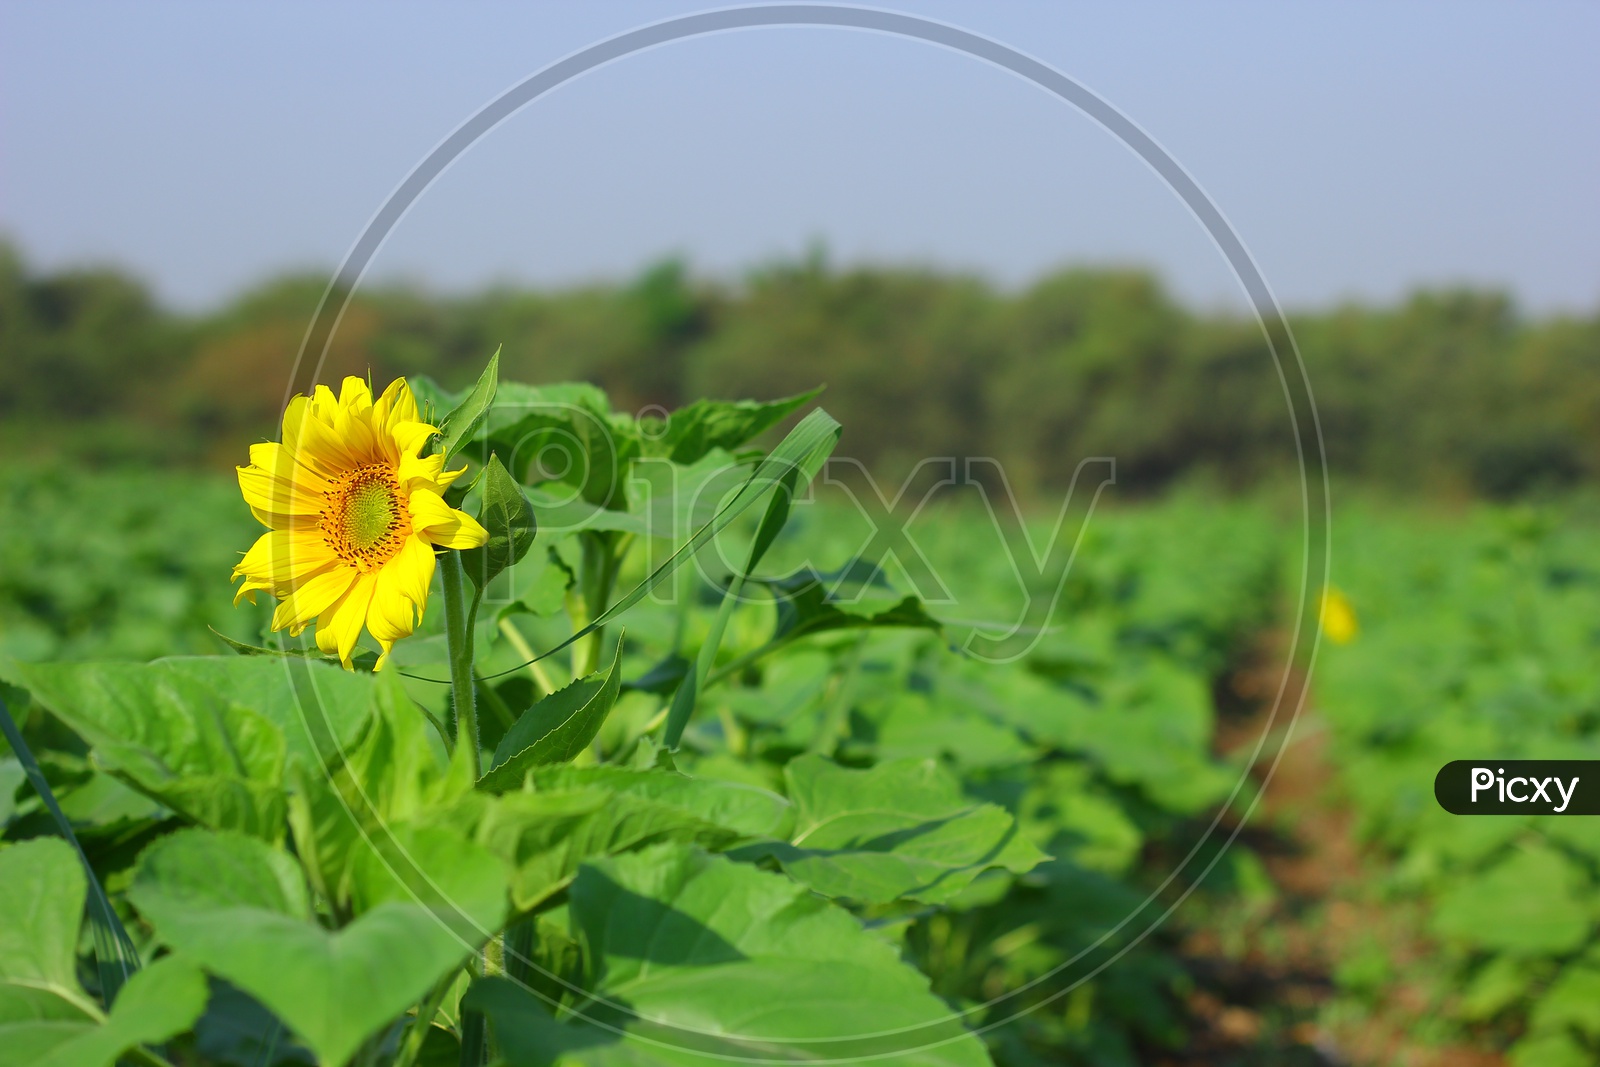 Sunflower Blooming in an Agricultural Feild / Sunflower in a Natural Green Feild  Background